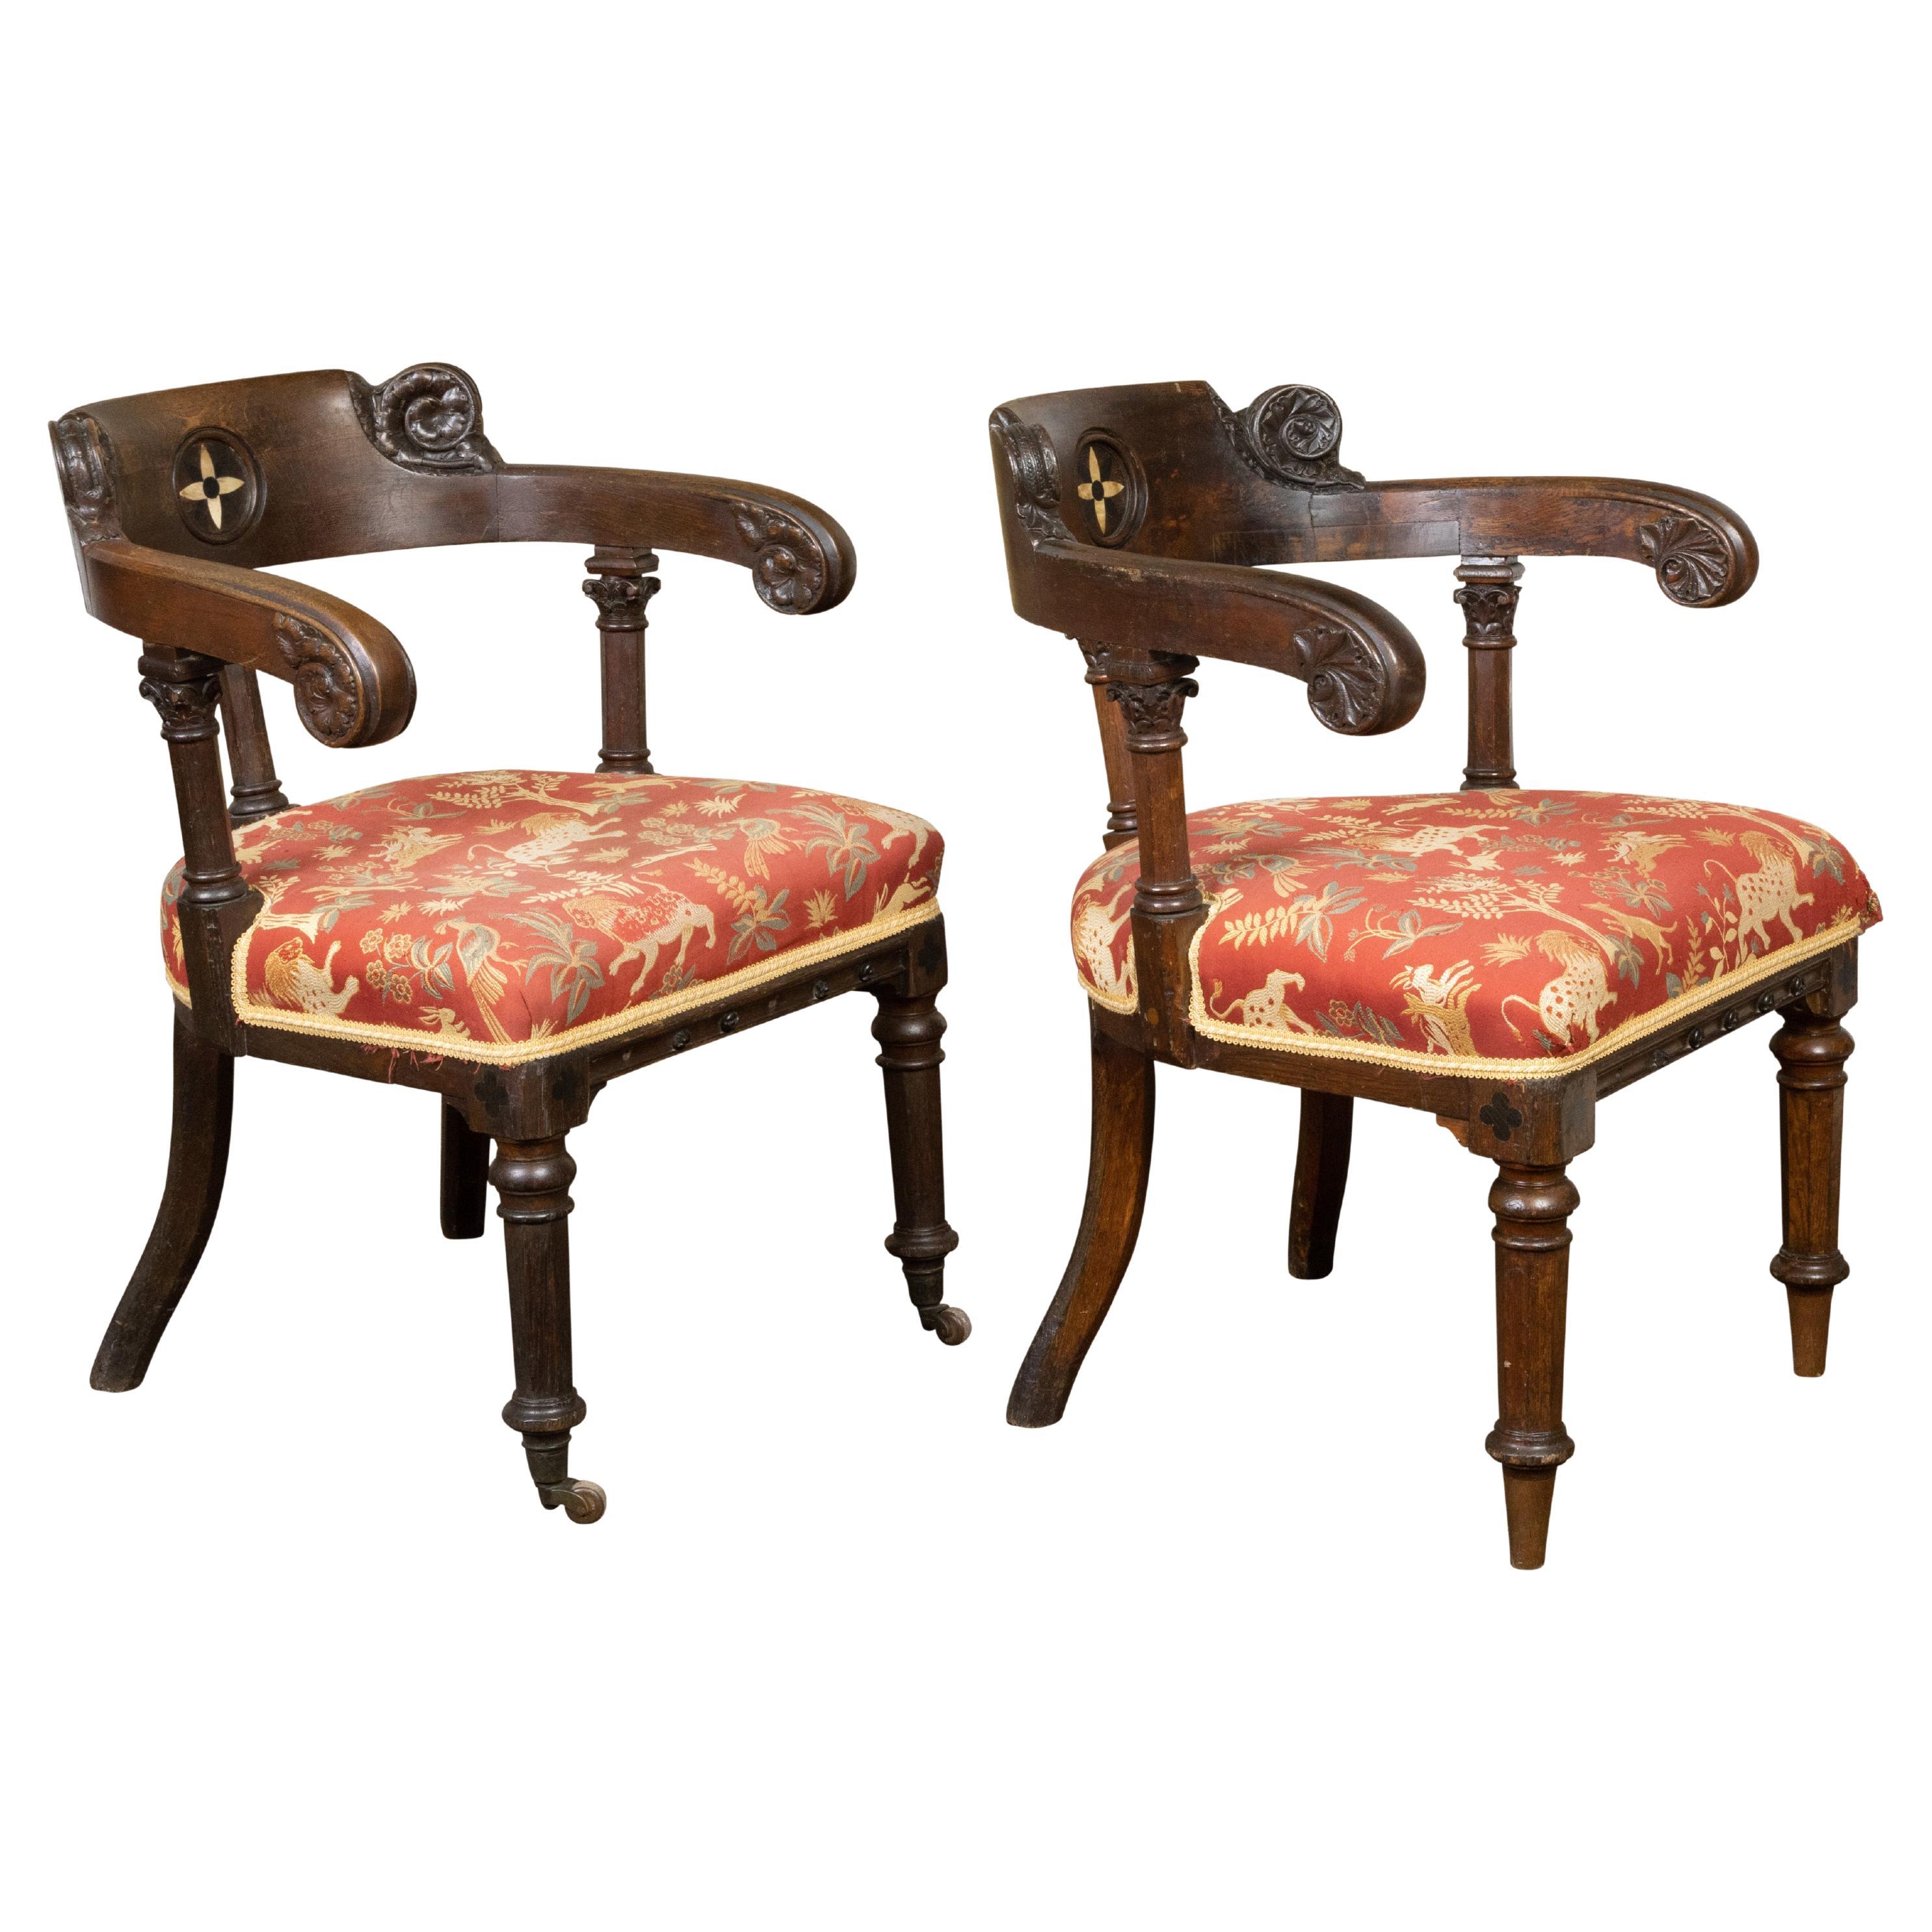 Pair of English Regency Style Carved Oak Klismos Chairs with Horseshoe Backs For Sale